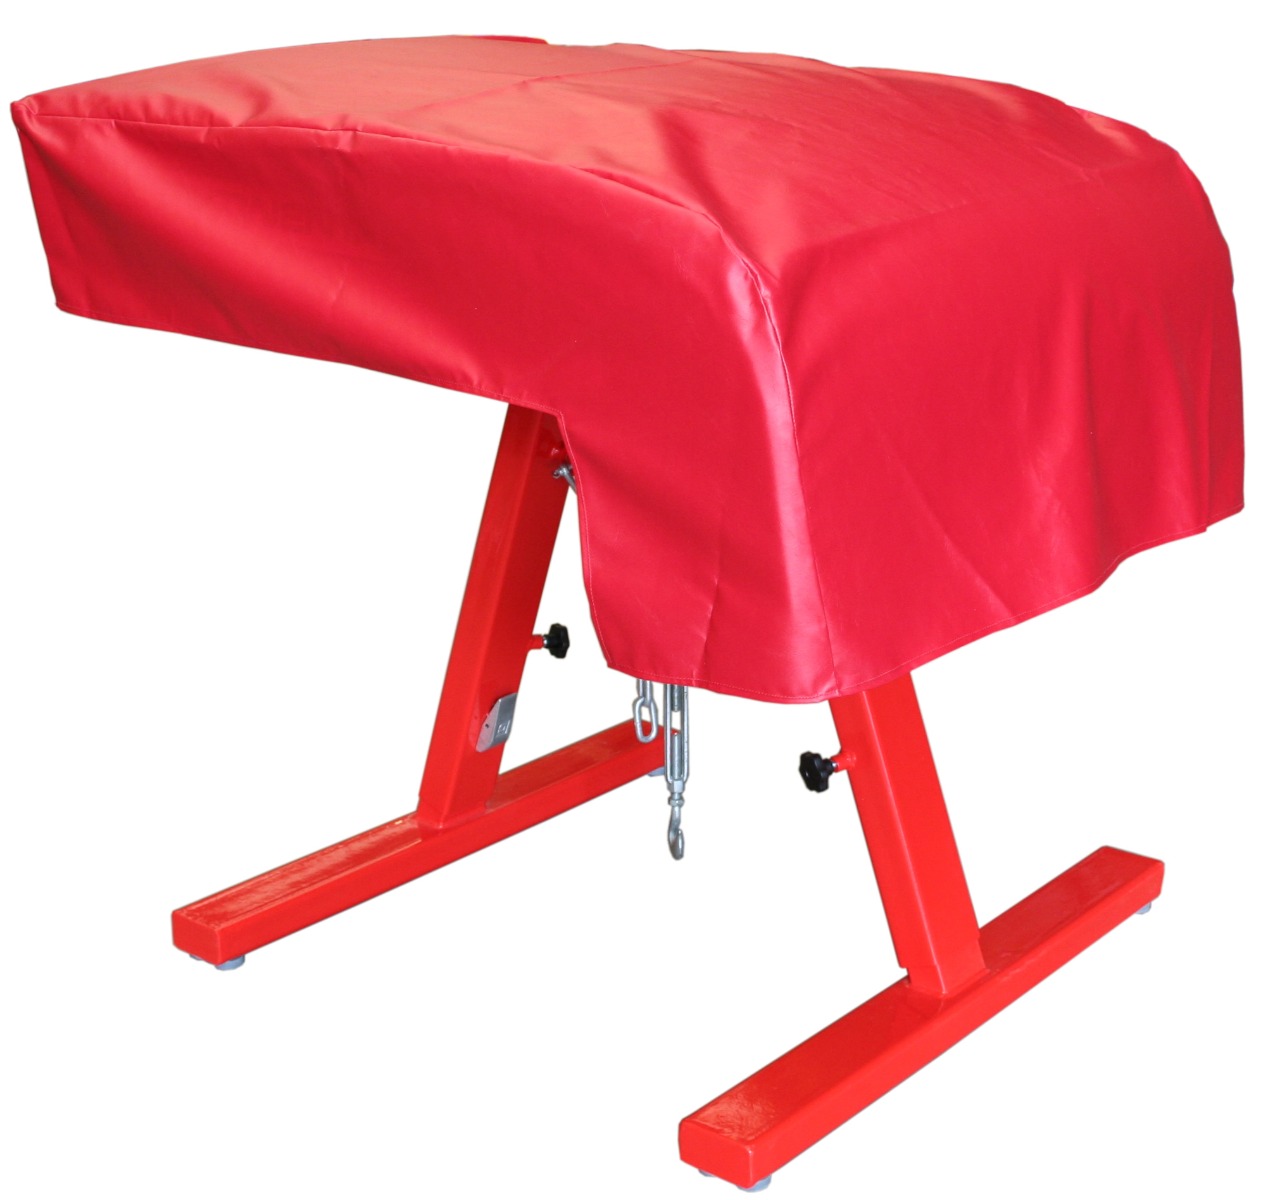 Vaulting table dust cover